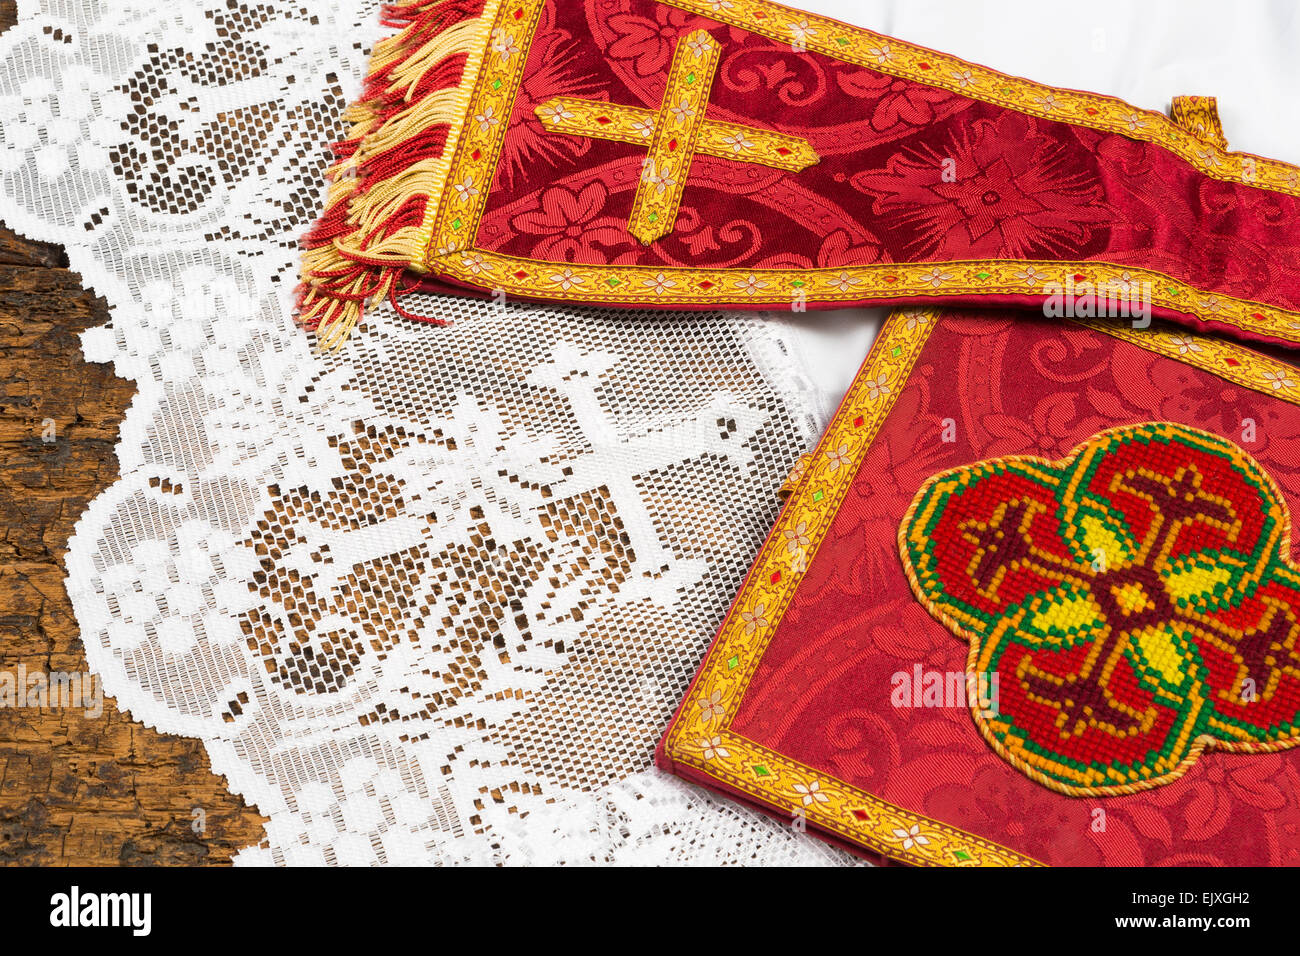 Antique red damask chalice veil and maniple on a white lace catholic priest surplice Stock Photo